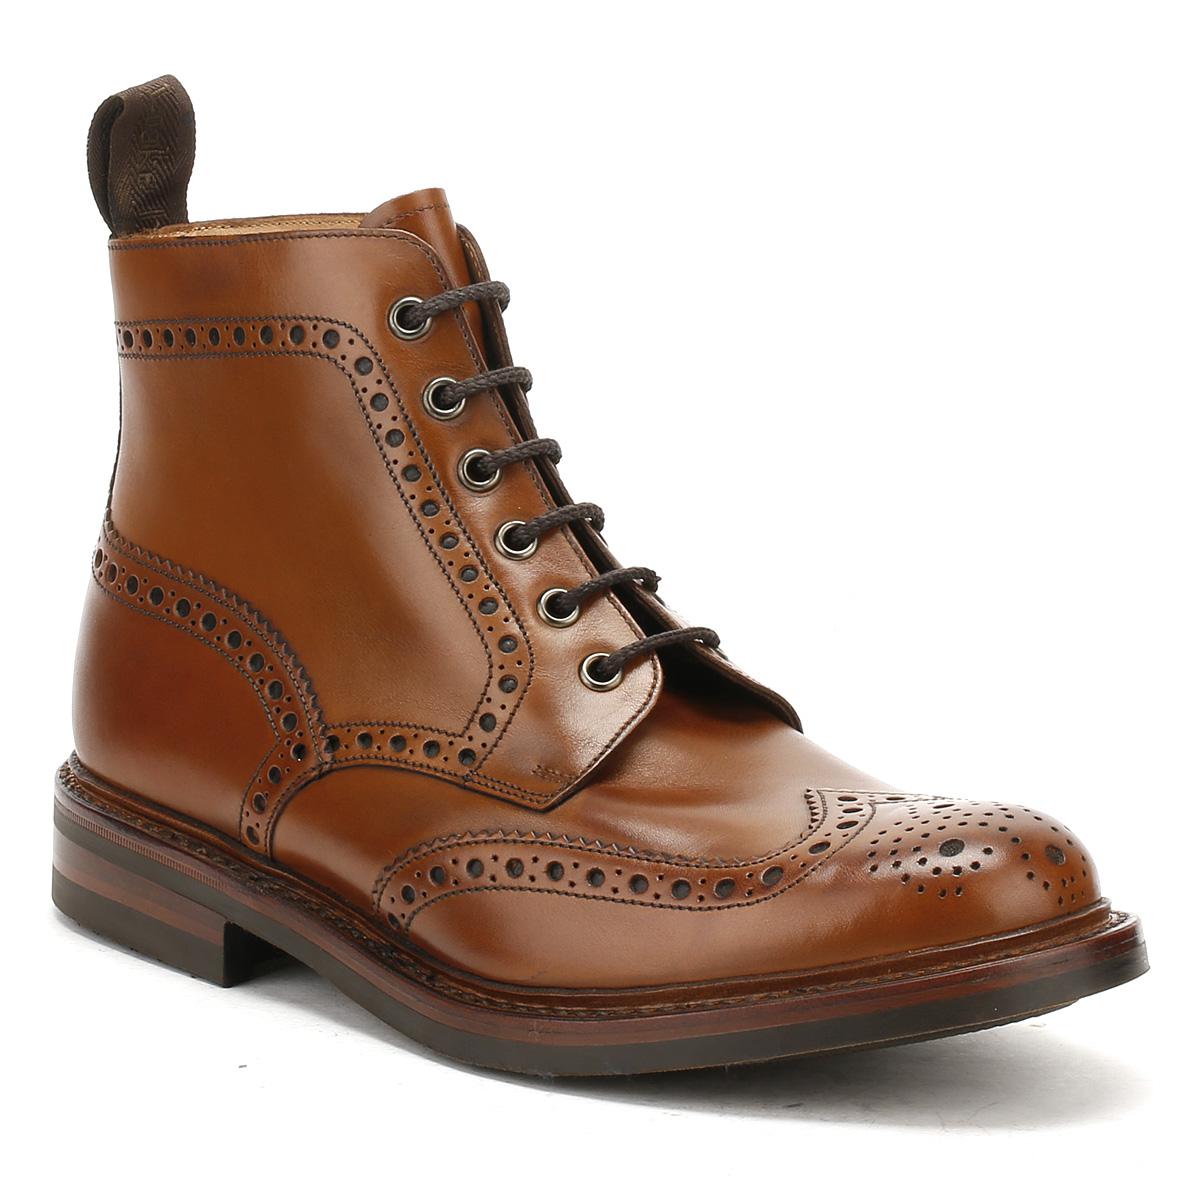 Lyst - Loake Mens Brown Calf Bedale Brogue Boots in Brown for Men